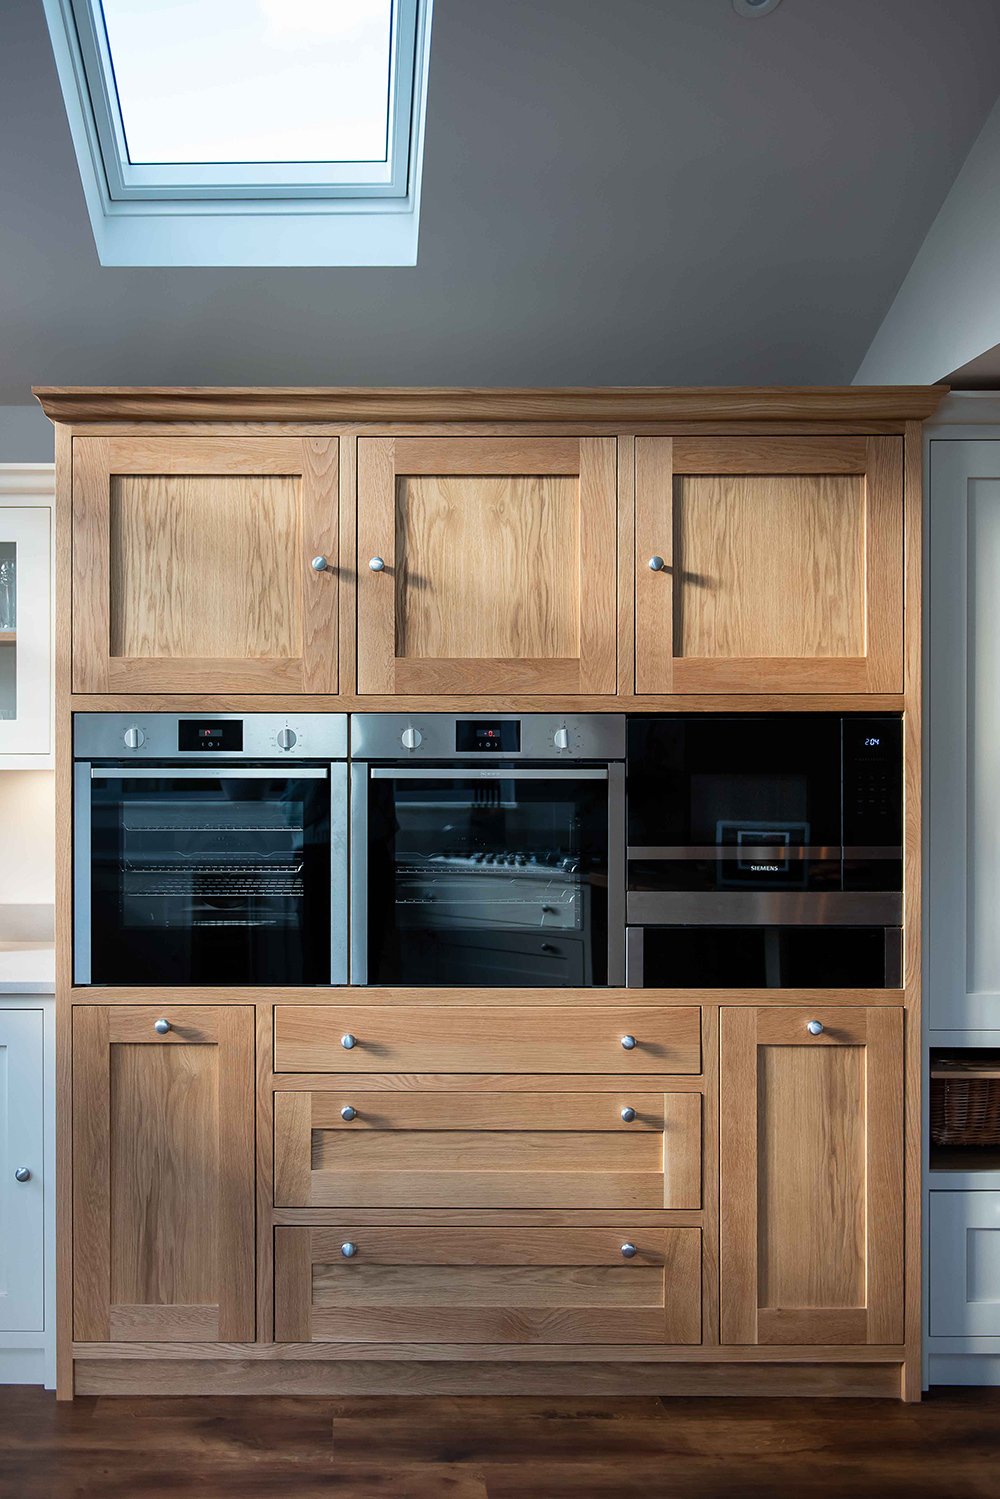 The Oak Timbers Kitchen by Shere Kitchens - beautiful kitchens handmade in Shere Guildford Surrey